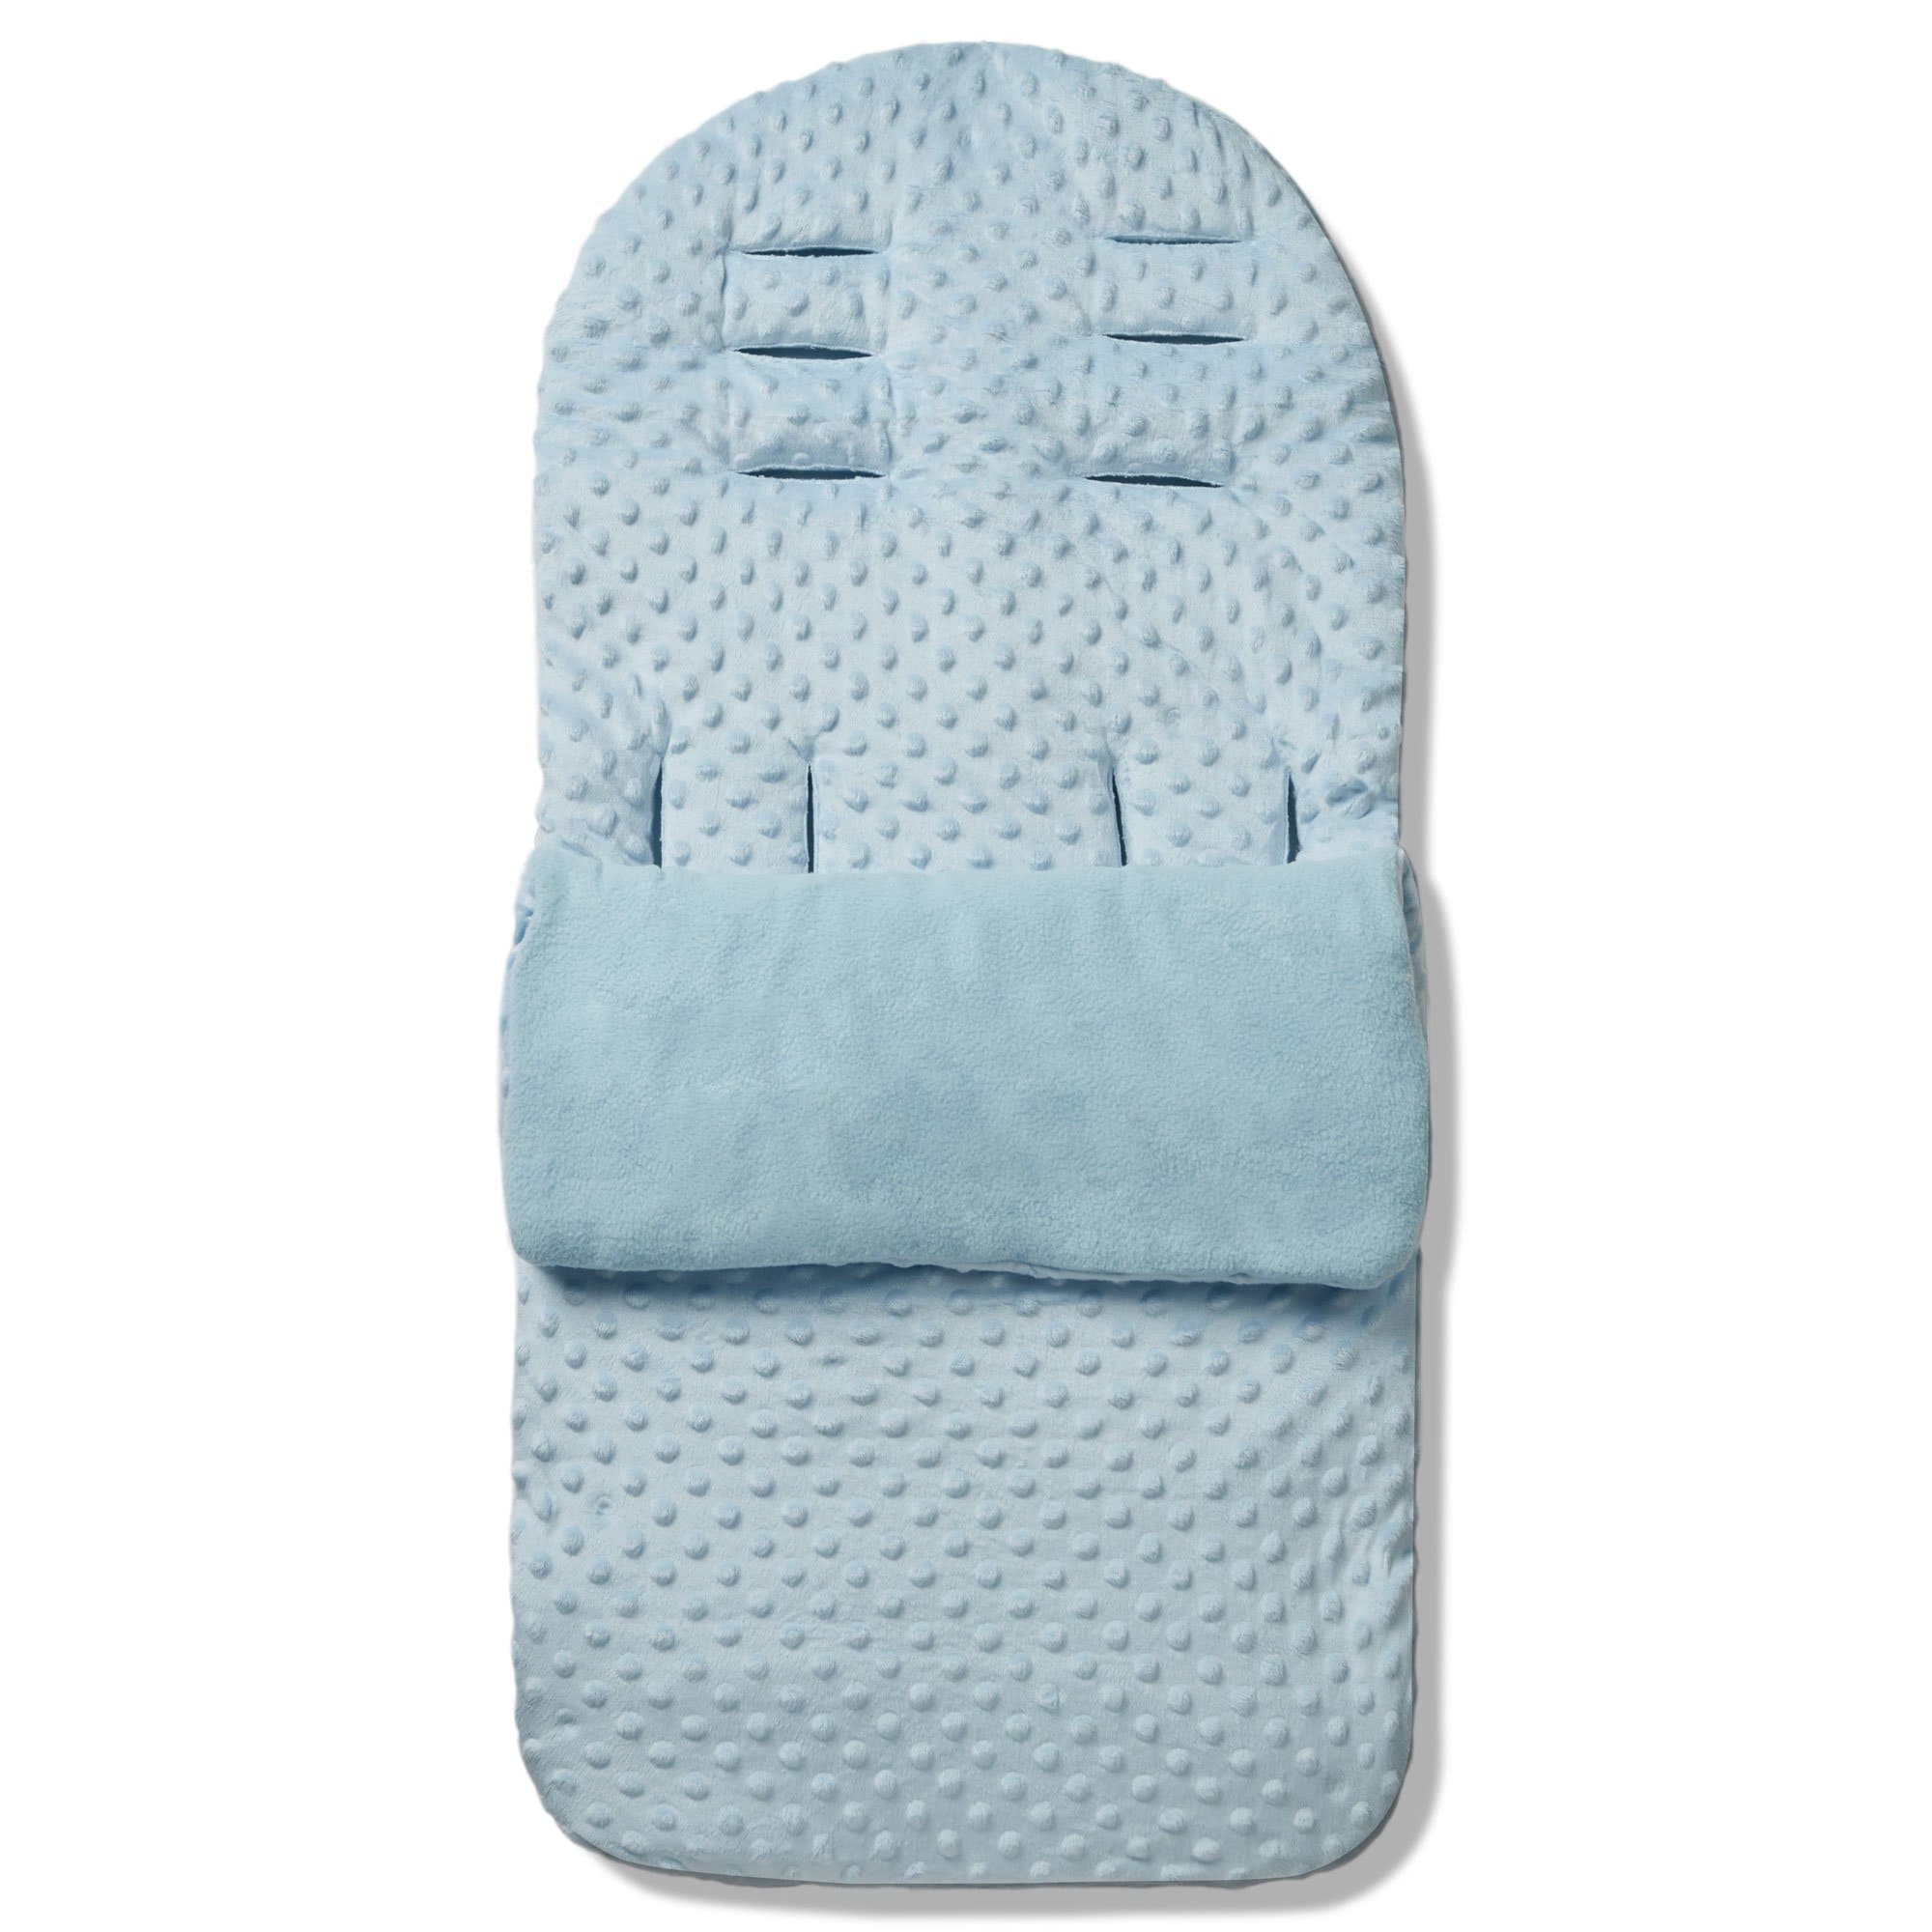 Dimple Footmuff / Cosy Toes Compatible with Teutonia - For Your Little One